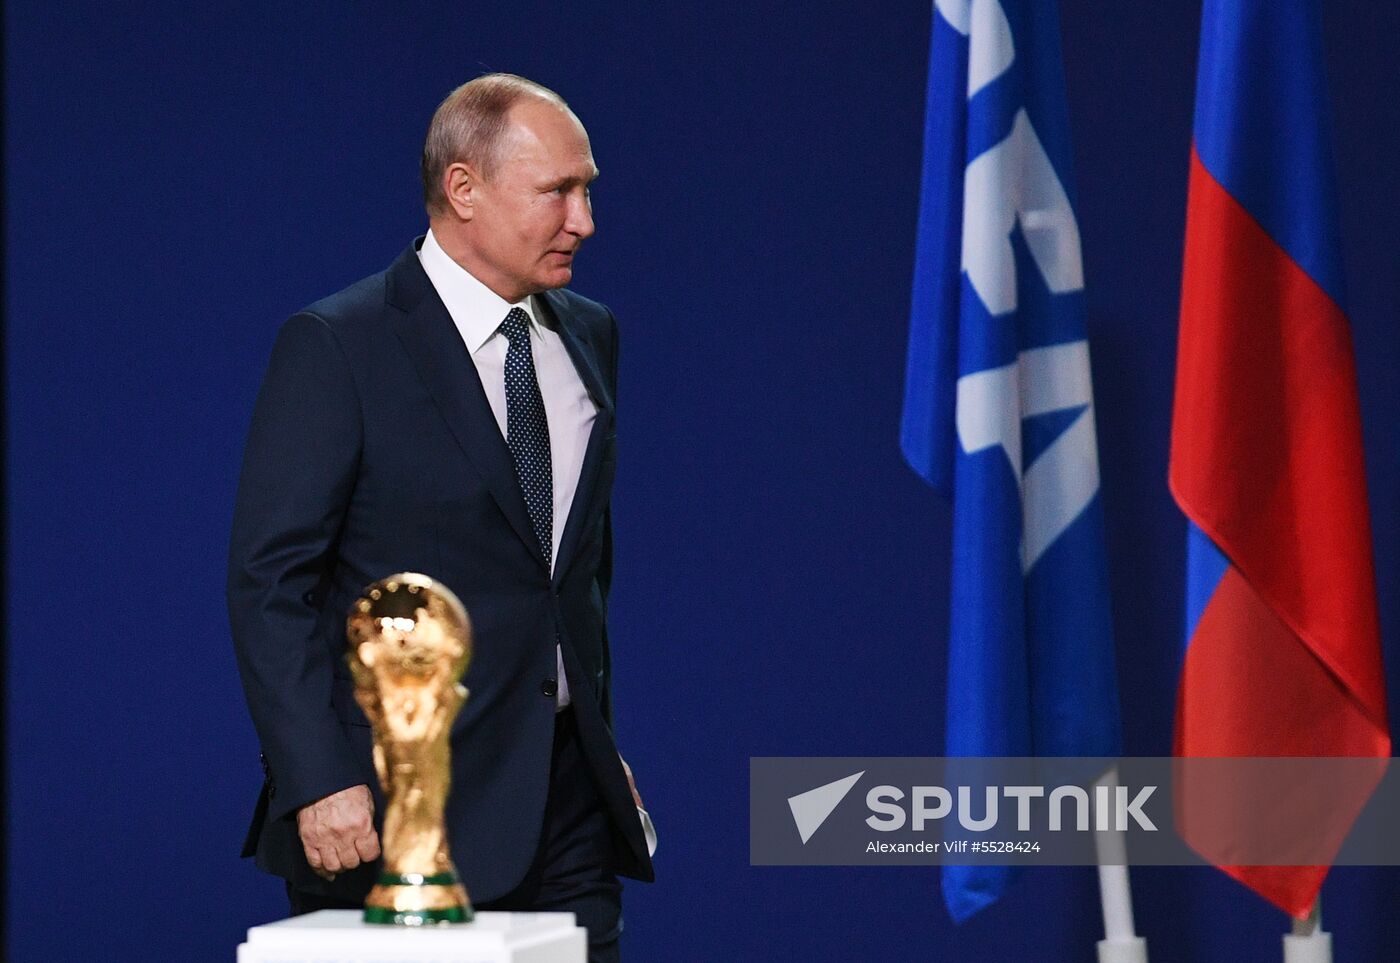 Russia World Cup 2026 Elections